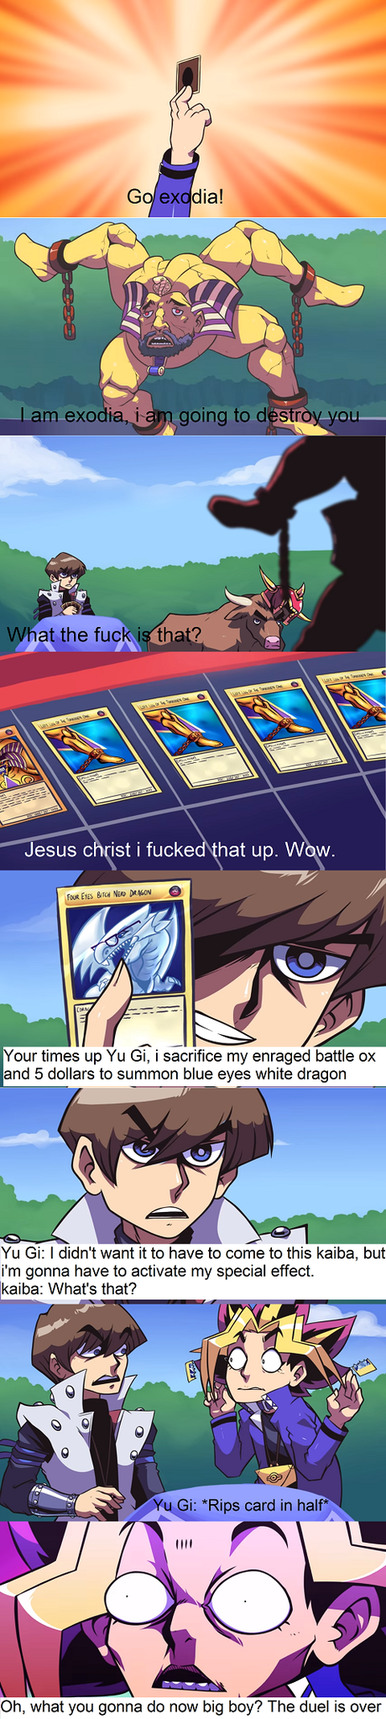 How to win card games 101 (Yu-Gi-No by SpeedoSausage) - meme